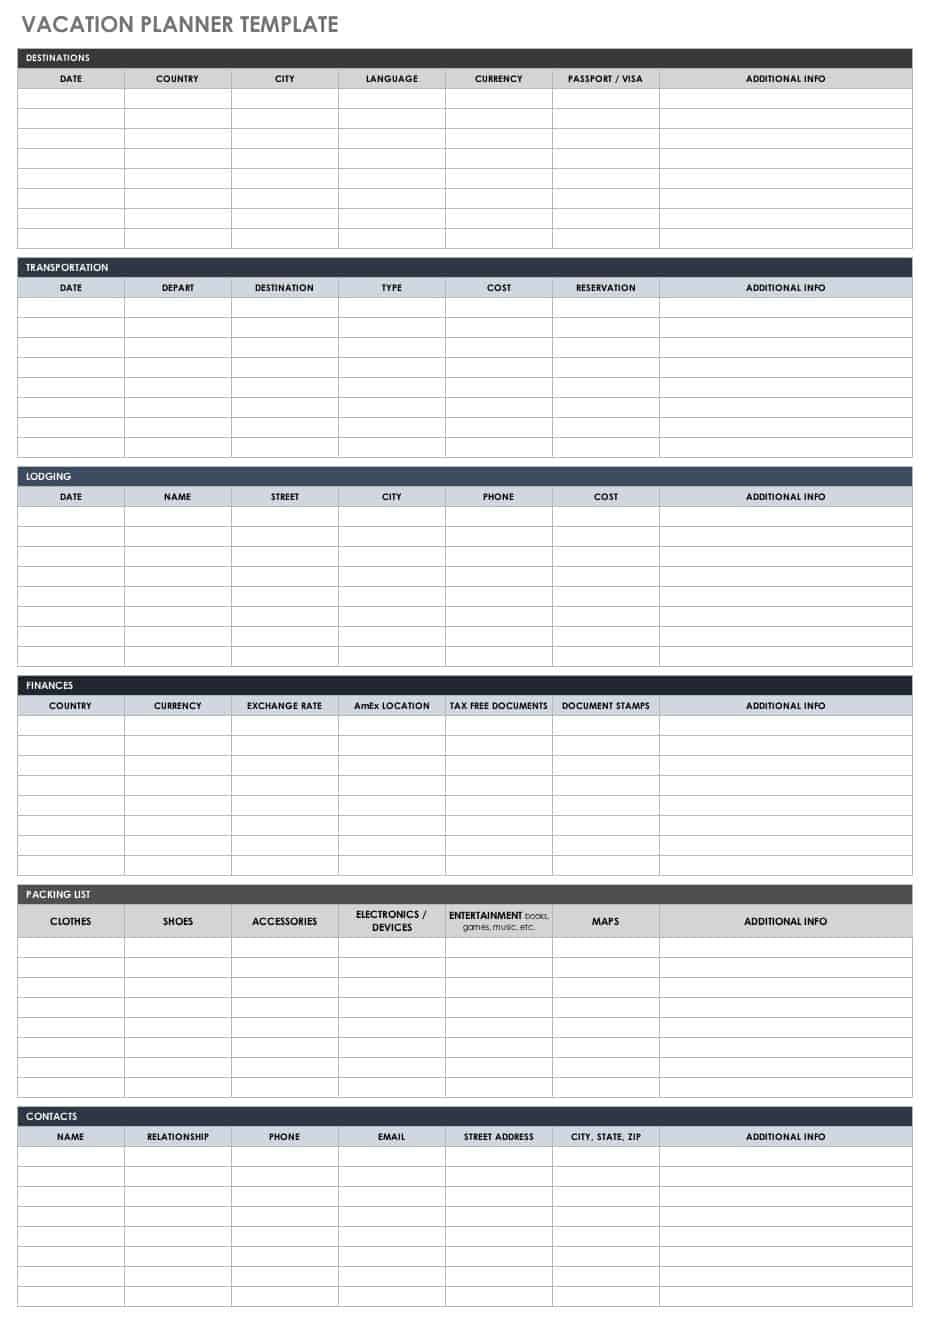 Free Itinerary Templates  Smartsheet With Regard To Travel Planner Itinerary Template